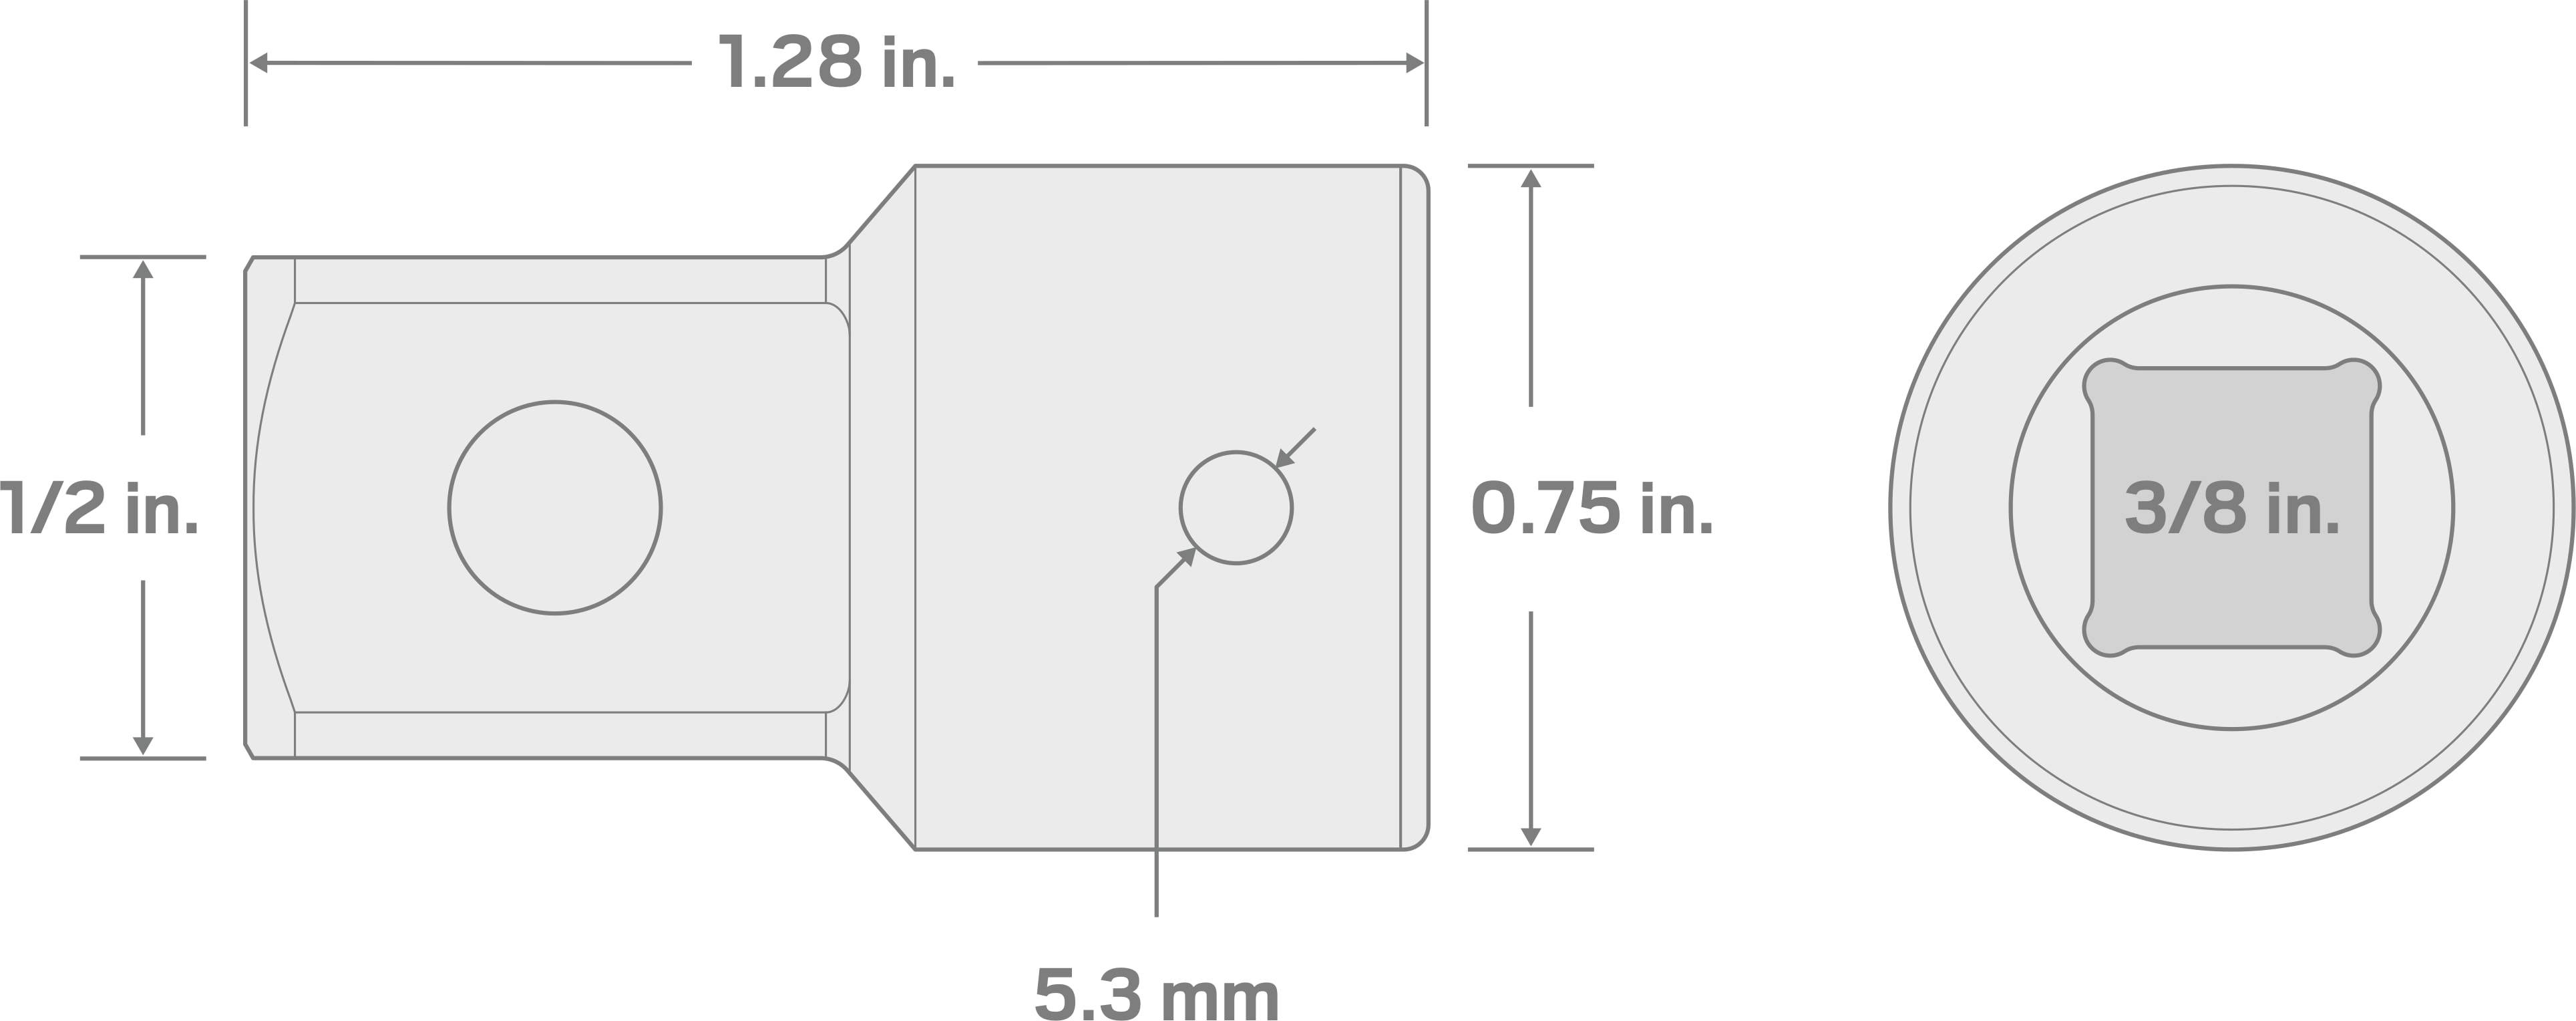 Specs for 3/8 Inch Drive (F) x 1/2 Inch (M) Impact Adapter